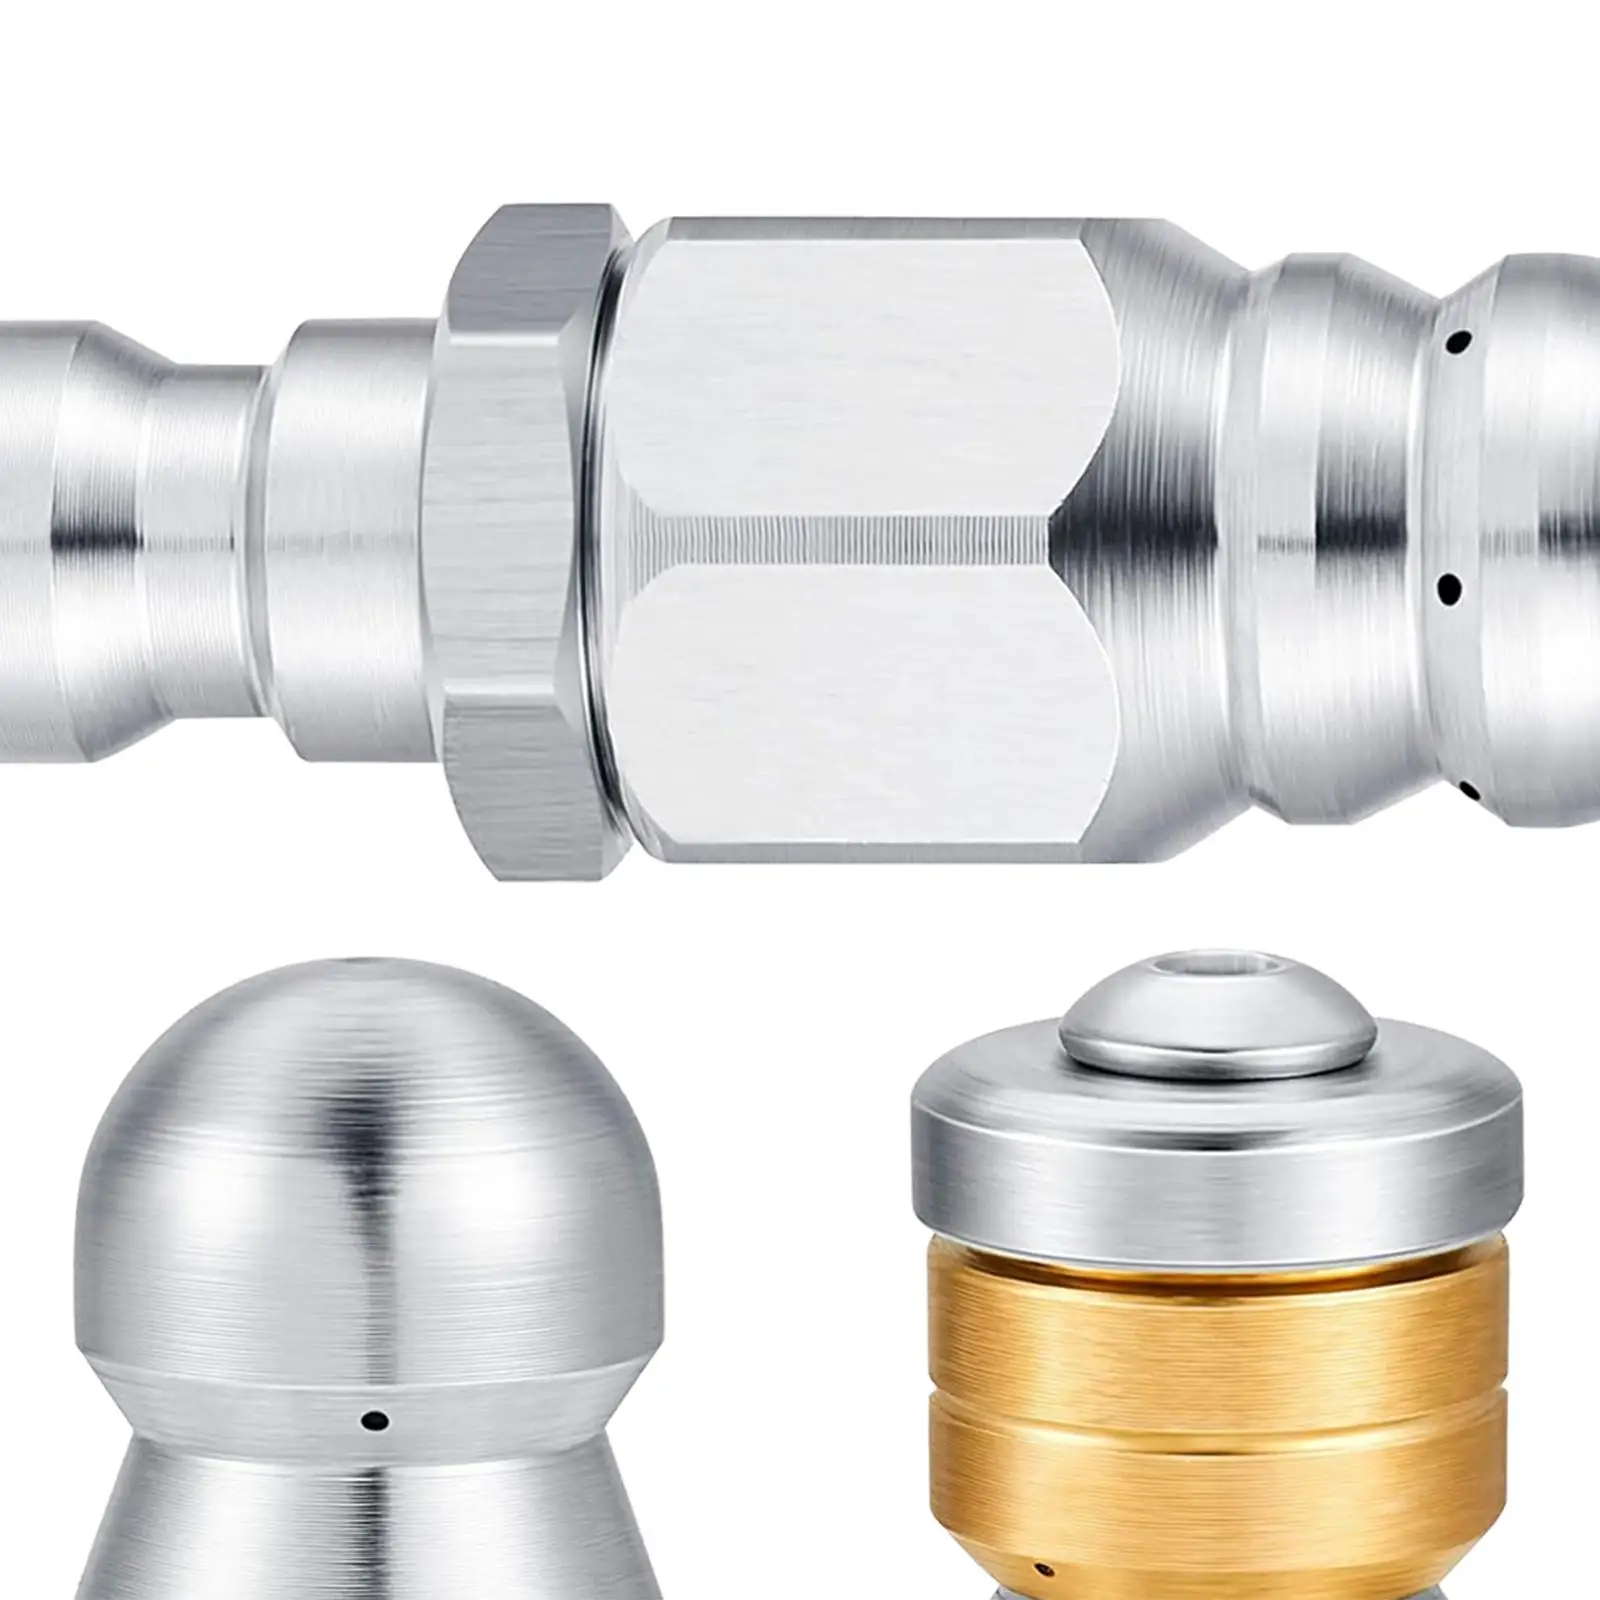 3 Pieces Sewer Jetter Nozzle Stainless Steel Pressure up to 5000PSI Fixed Sewer Nozzle for Pressure Washer Drain Jetting Hose